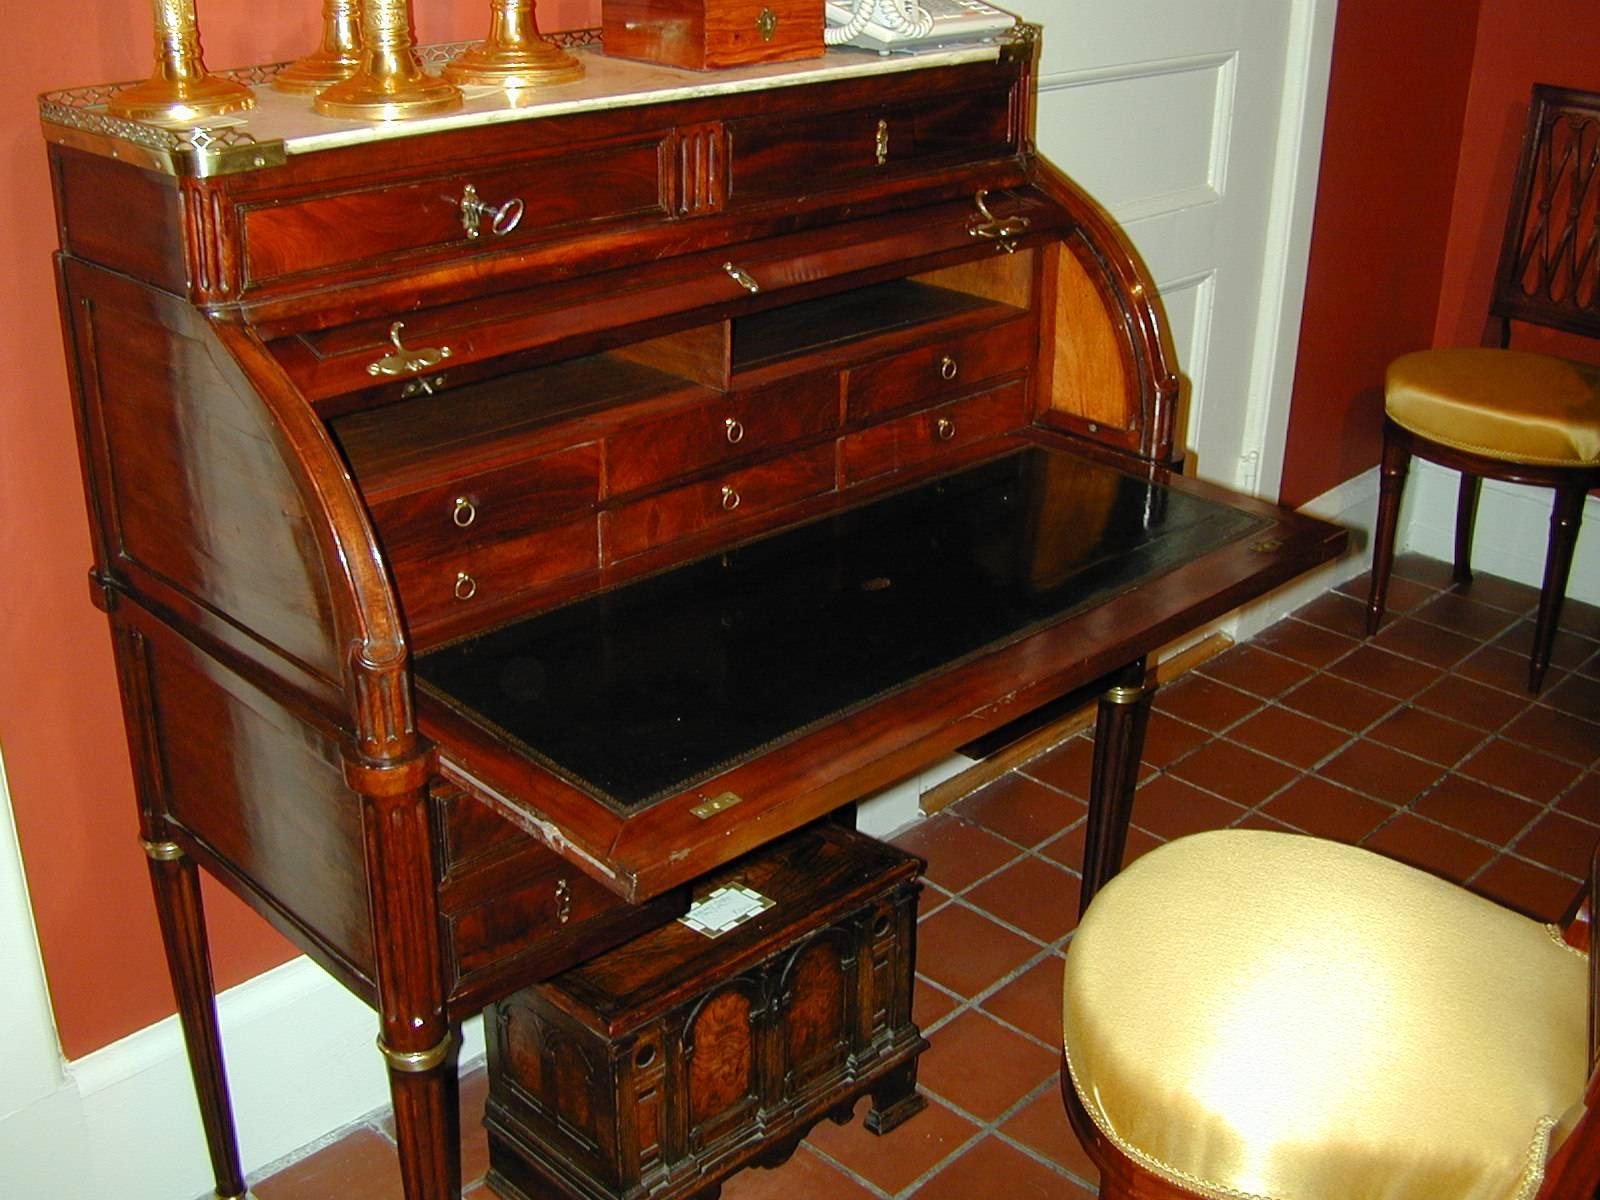 The desk with a 1/4 cylinder top that opens to reveal a leather writing surface with pigeon holes and drawers. The gallery with white Carrara marble top.